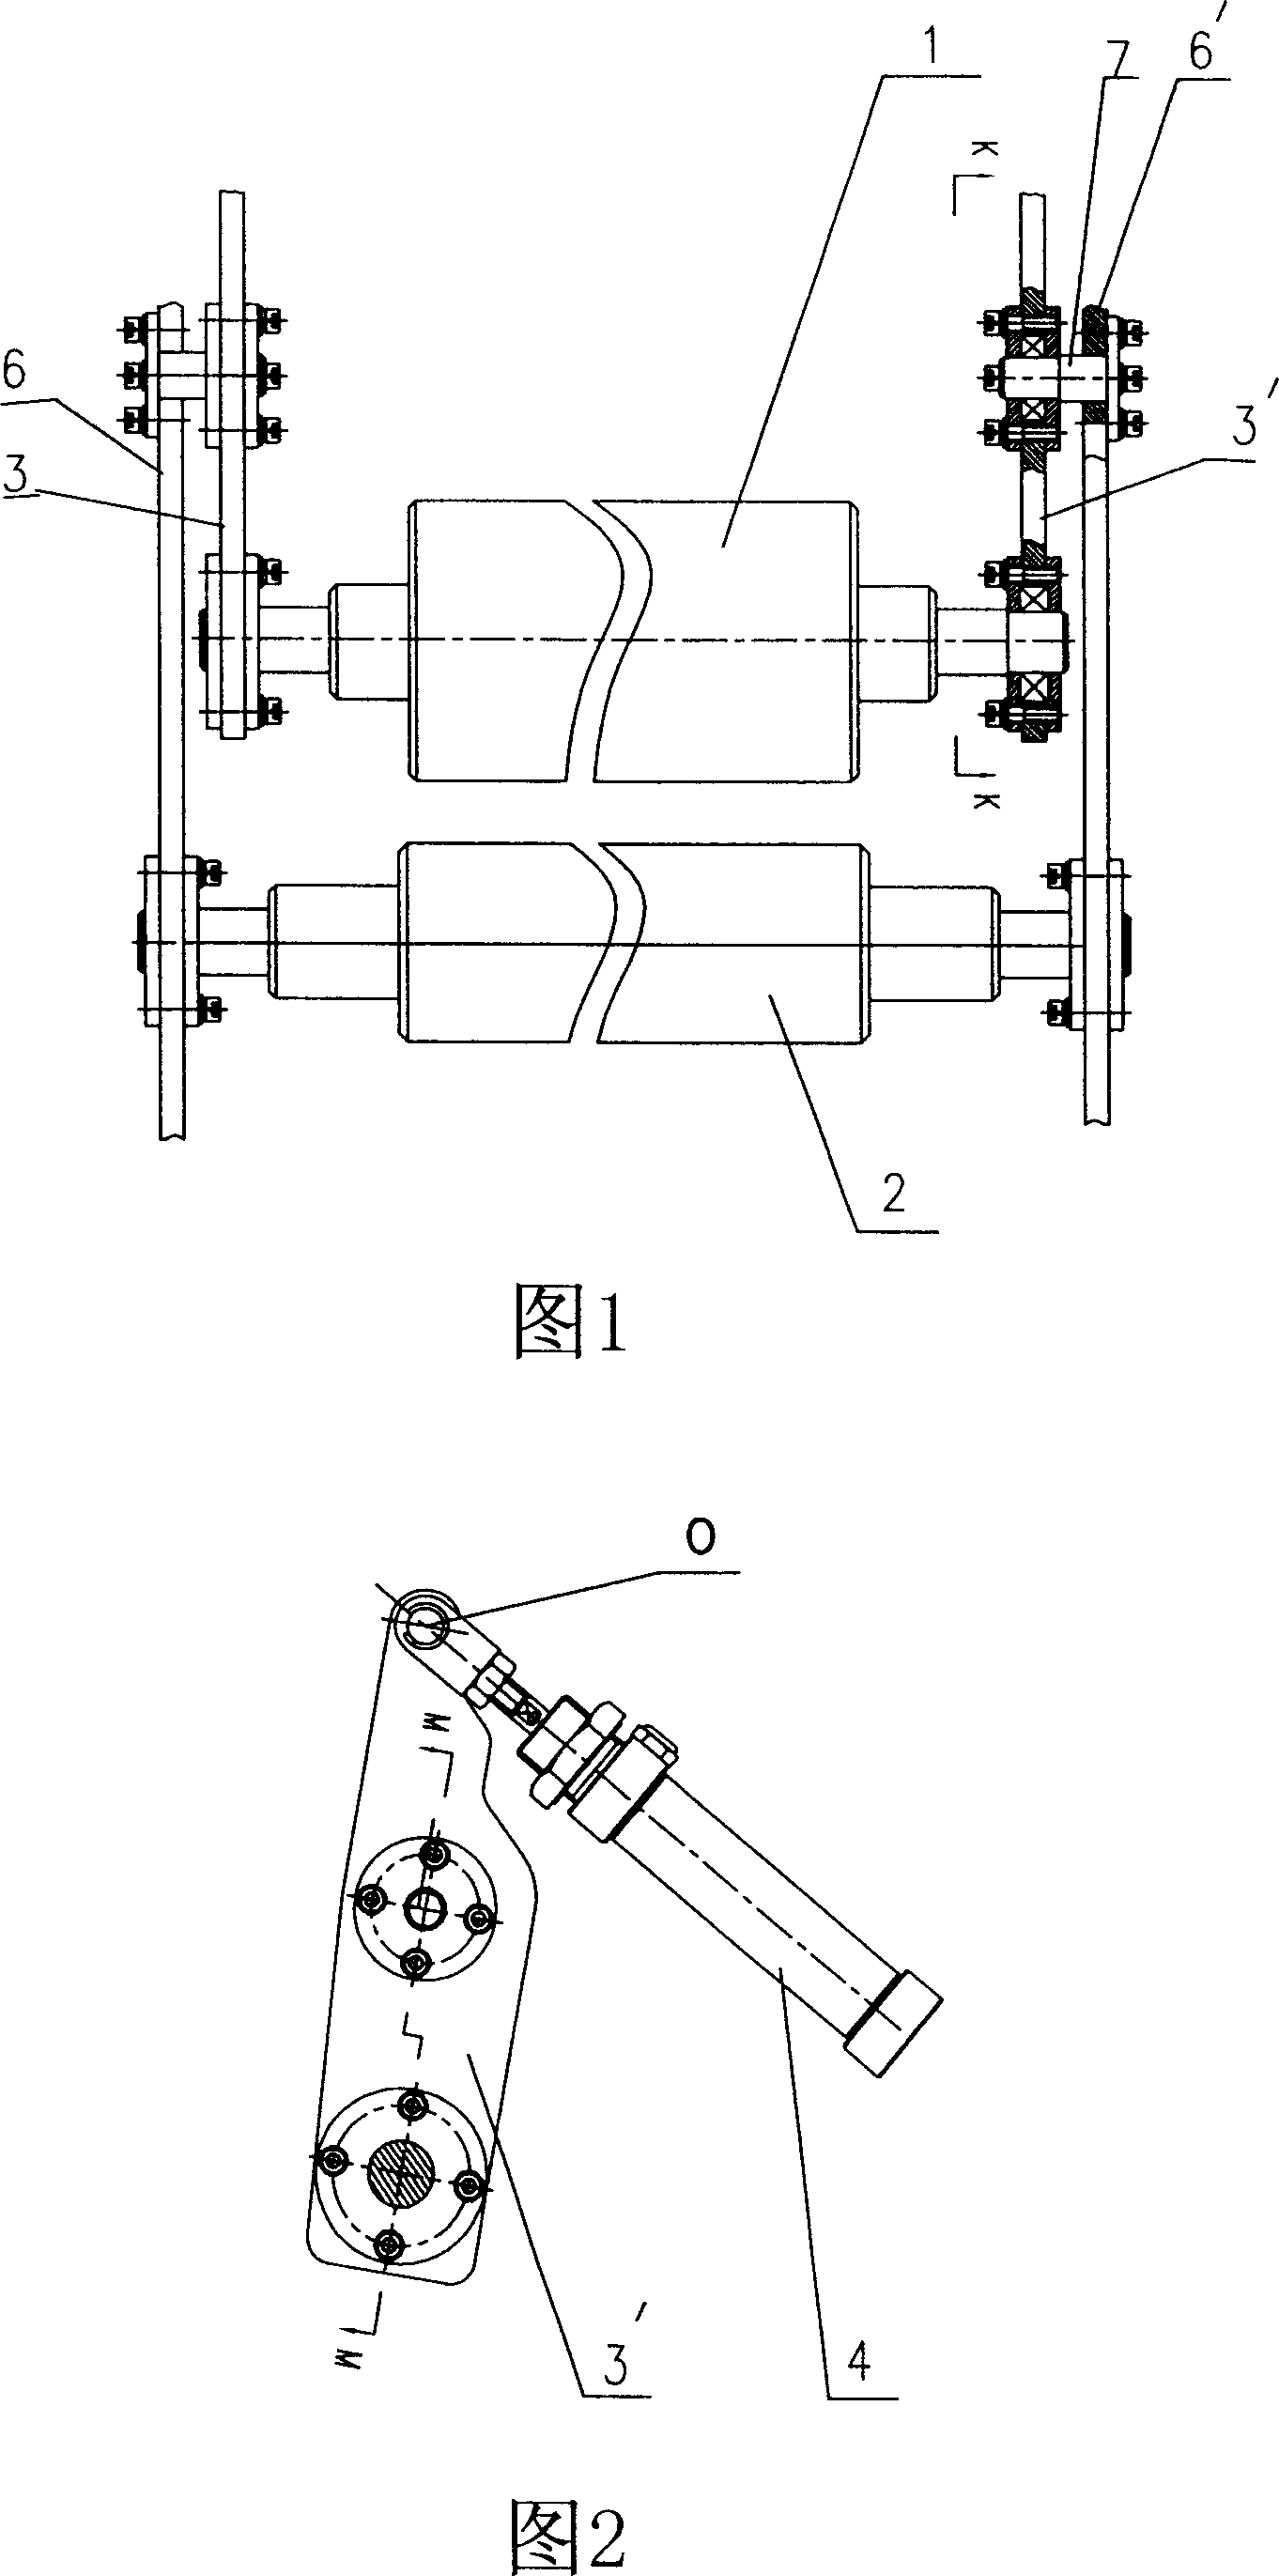 Cloth feeding and fastening mechanism of numerically controlled single heedle quilter